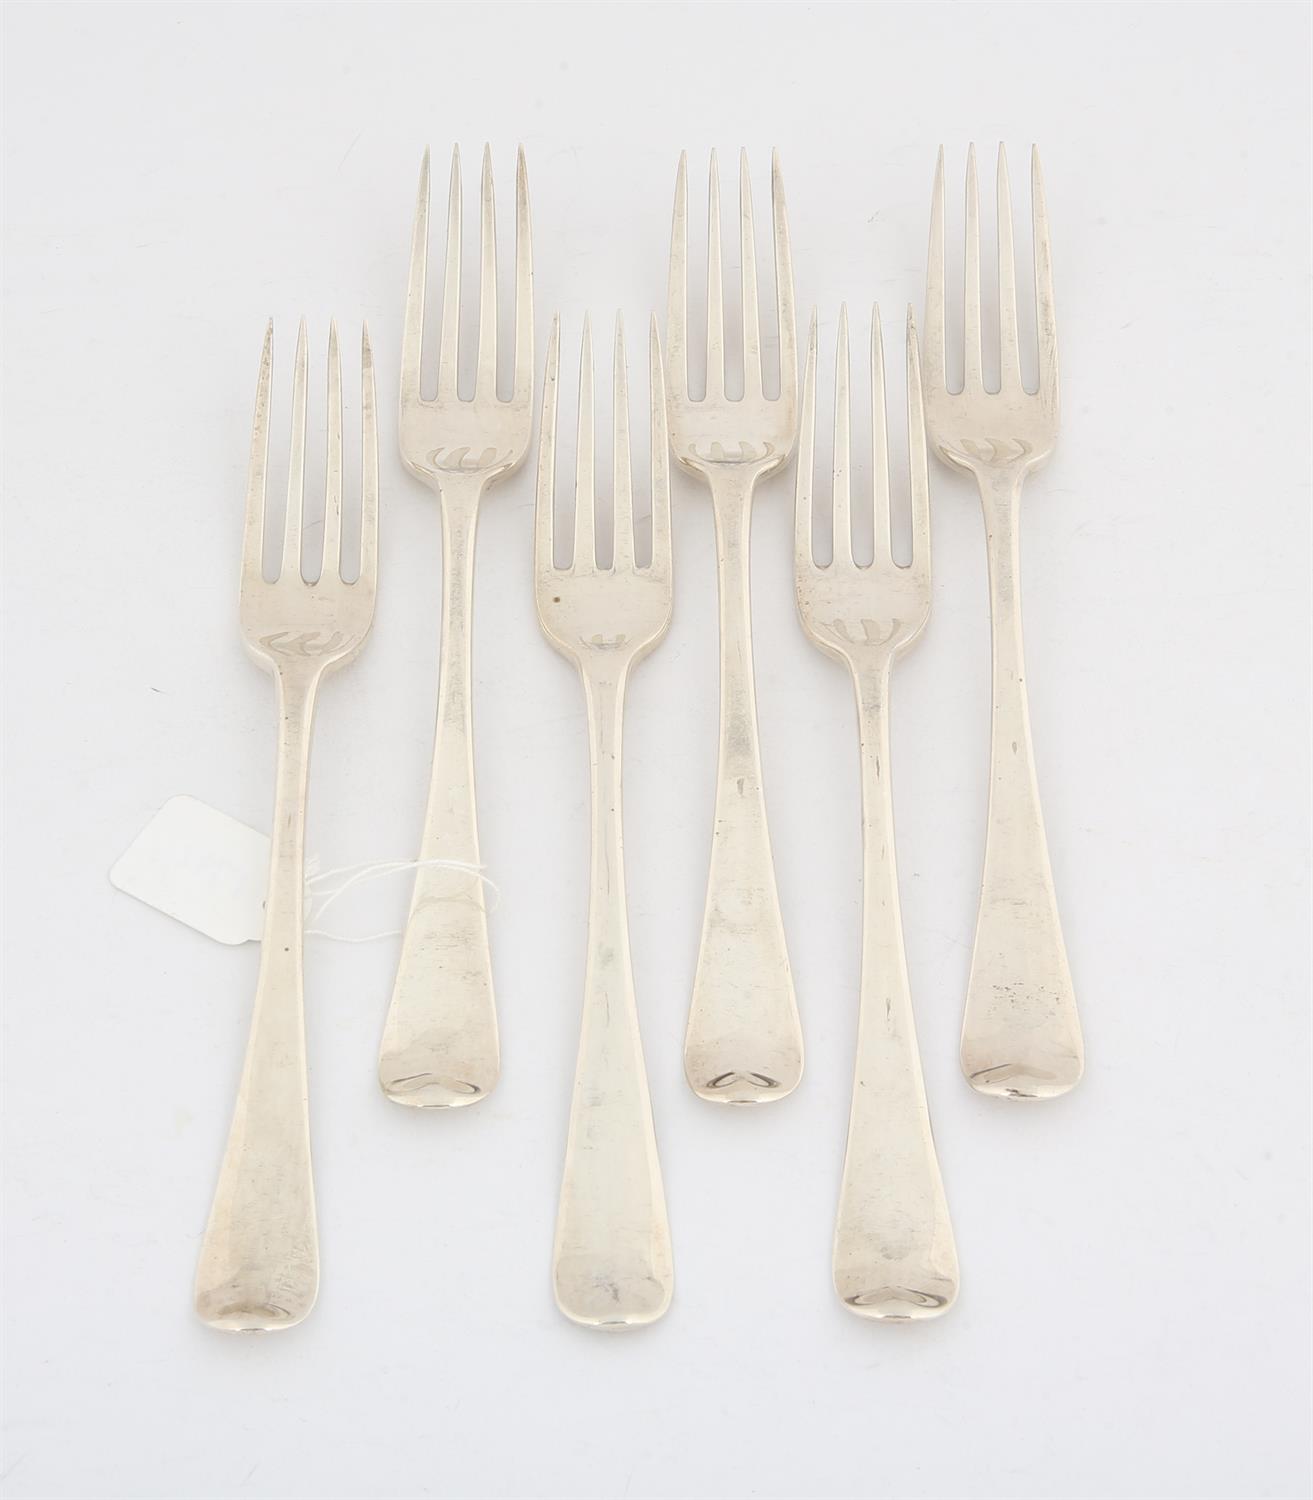 Six George III silver Old English pattern table forks, 12.3 ozs 382 grams SILVER COLLECTION OF